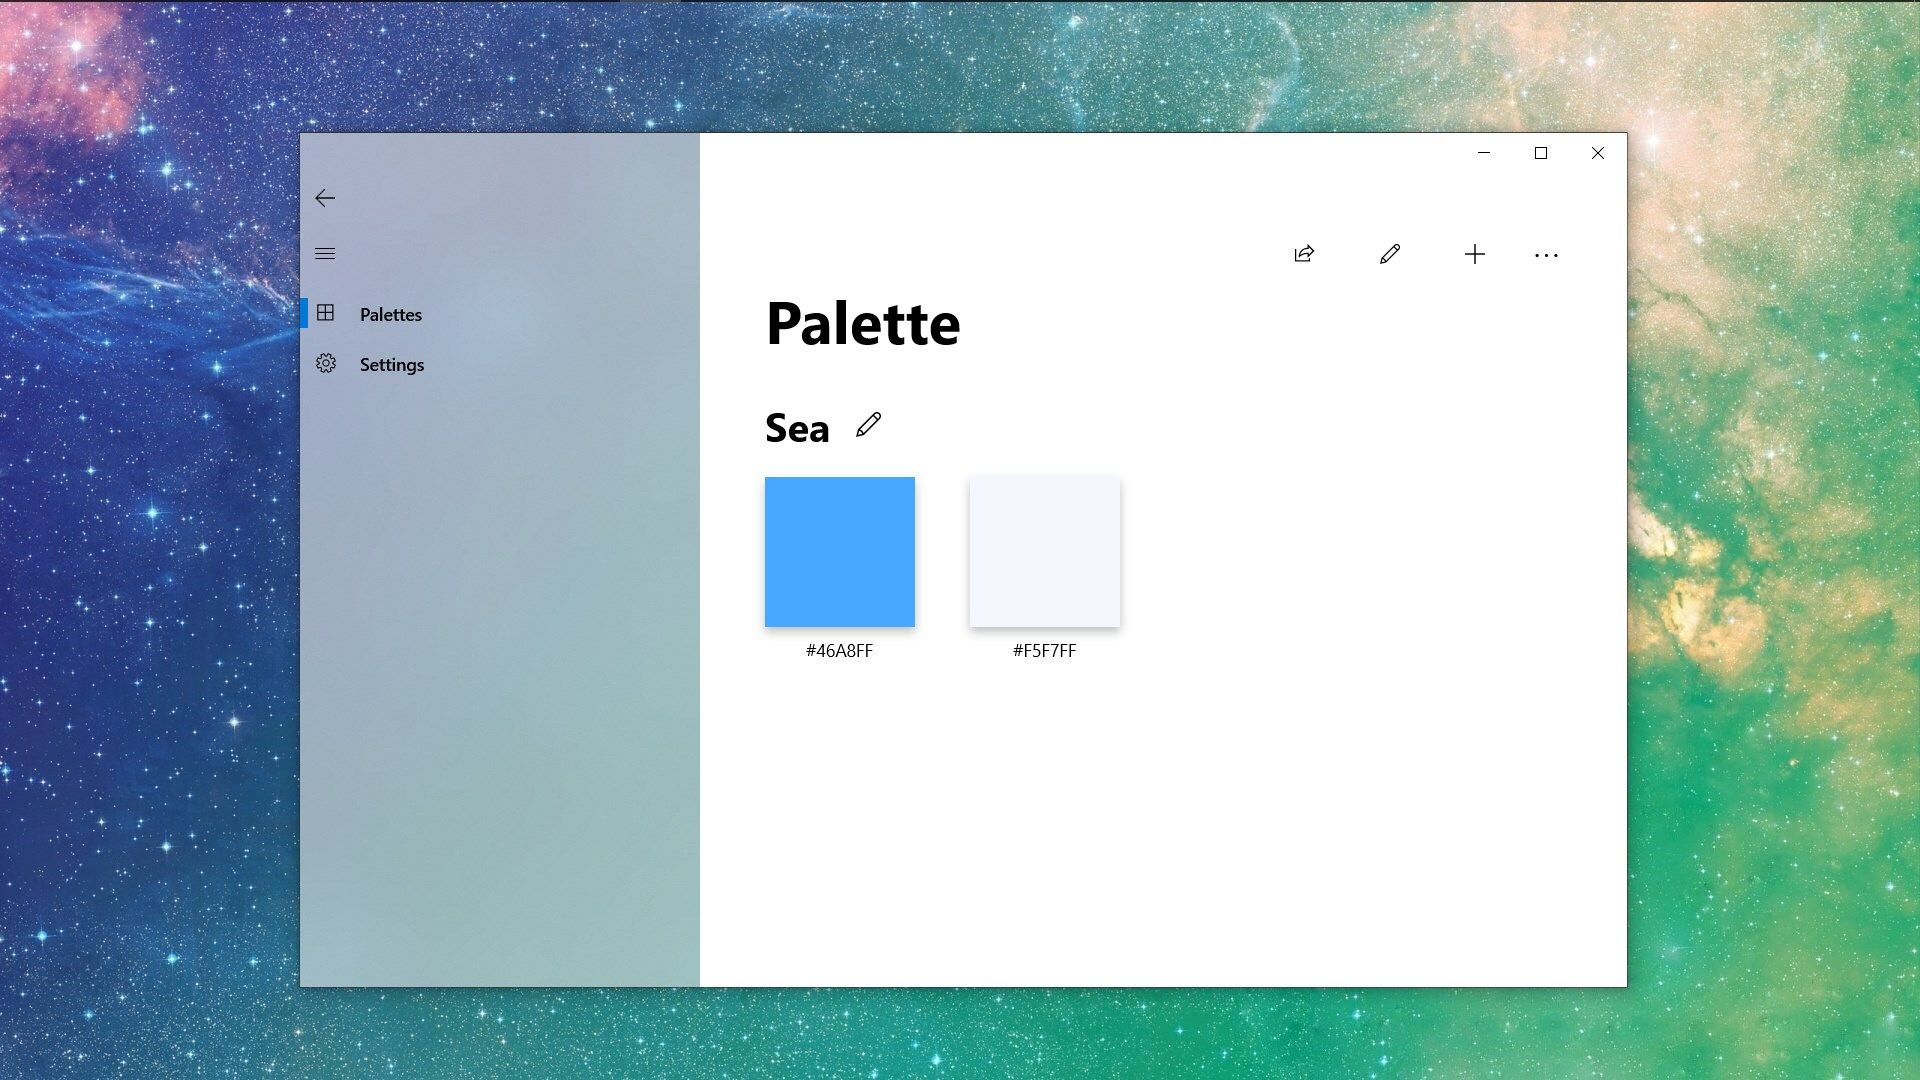 A palette you've selected, you can change its name or change the colors